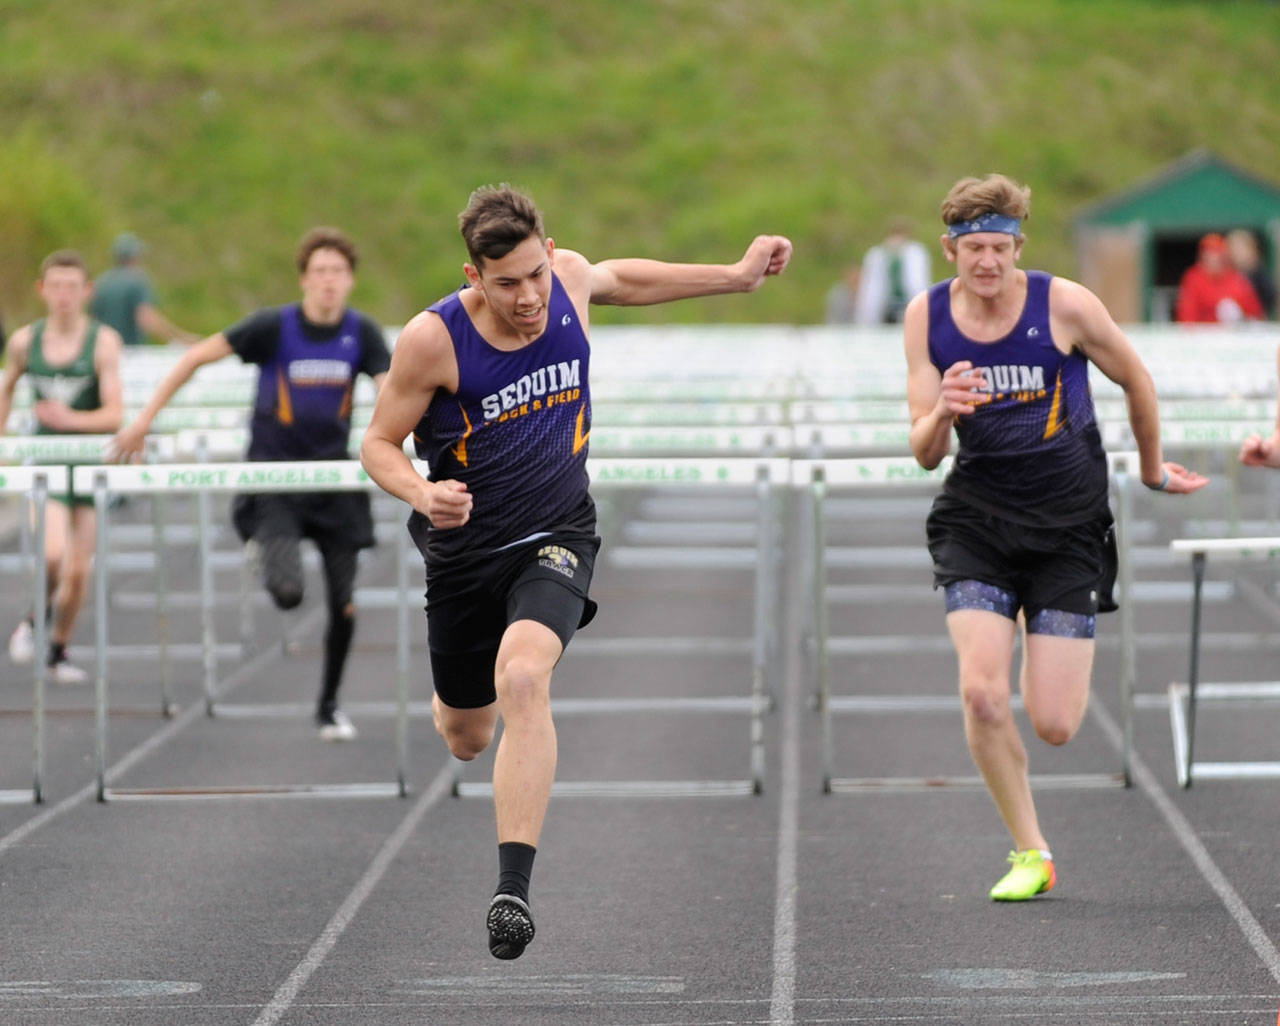 Sequim’s Riley Martin, center, edges teammate Fischer Jensen, right, at the finish line of the 110 high hurdles on April 25 in Port Angeles. Sequim Gazette photo by Michael Dashiell